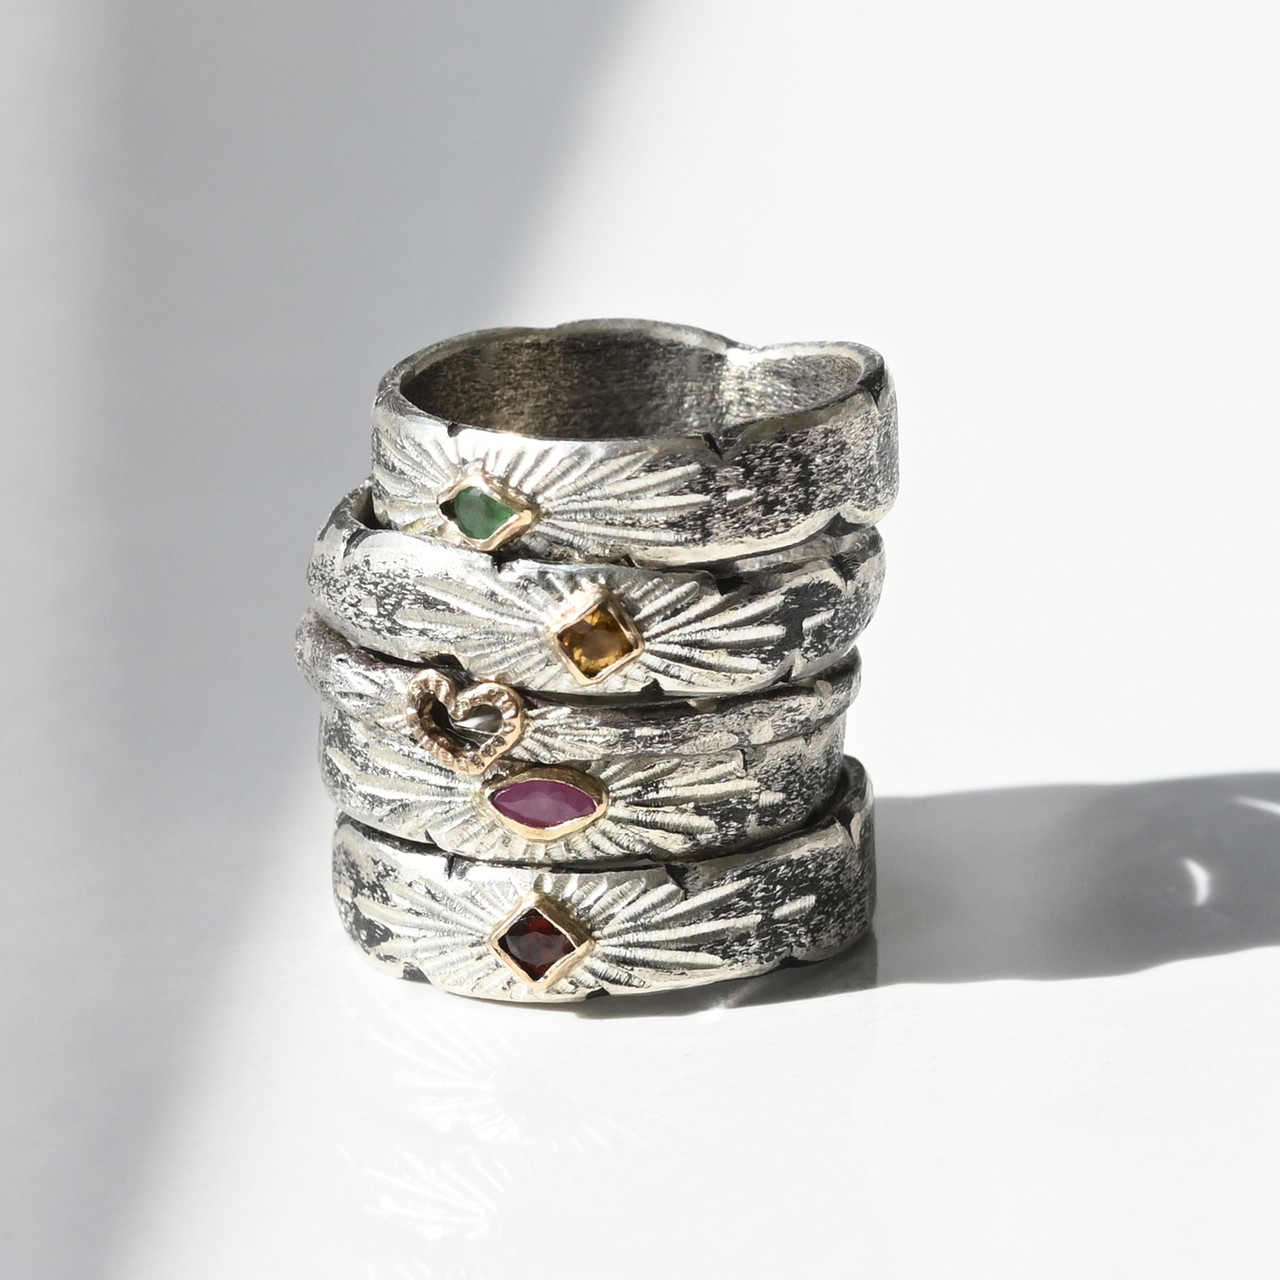 Rustic Silver Signature Band with Garnet, Franny E, tomfoolery